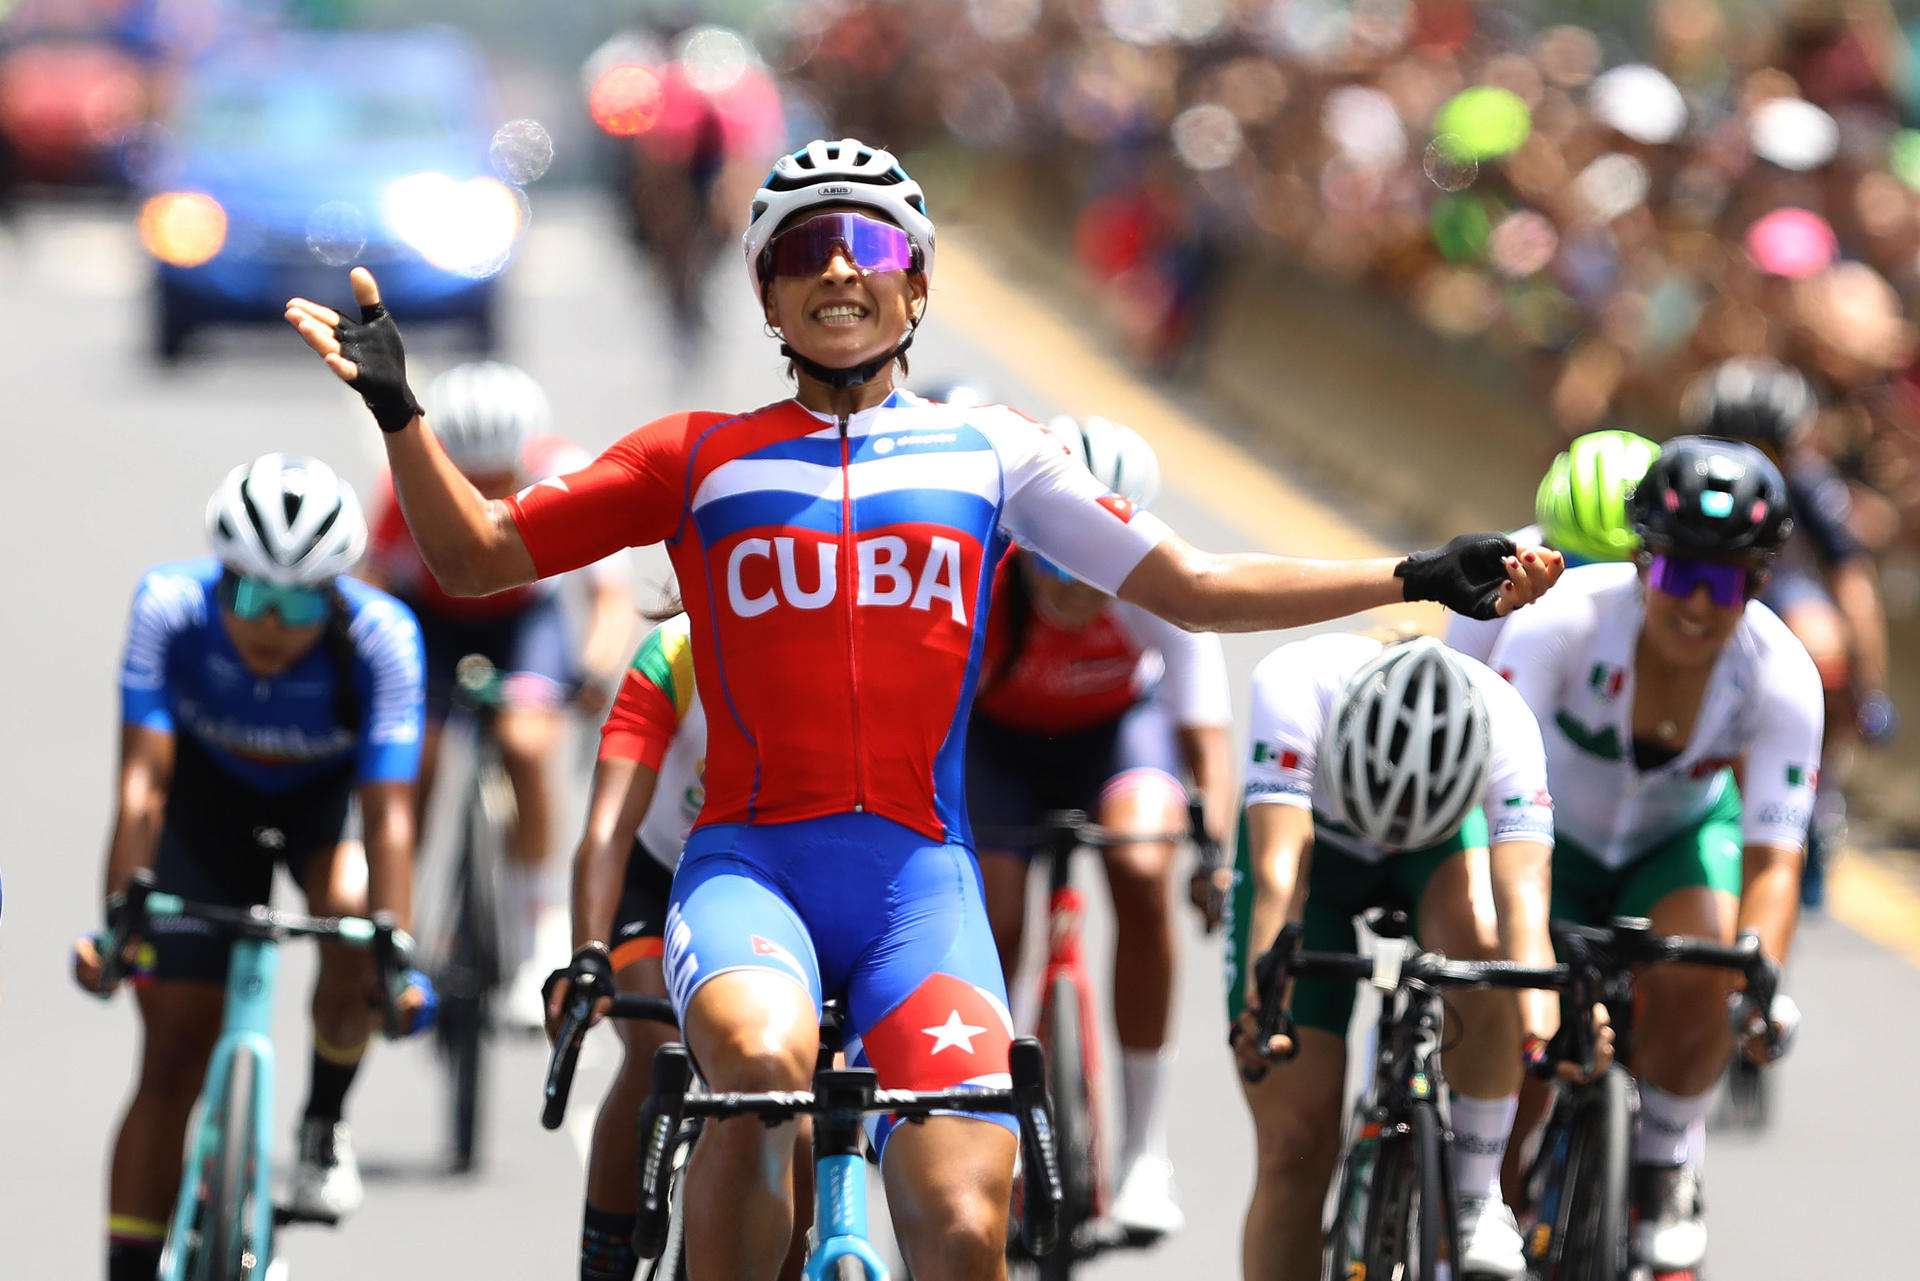 Arlenis Sierra celebrates by winning the women’s road cycling event at the Central American and Caribbean Games in San Salvador. Photo: Miguel Lemus/EFE